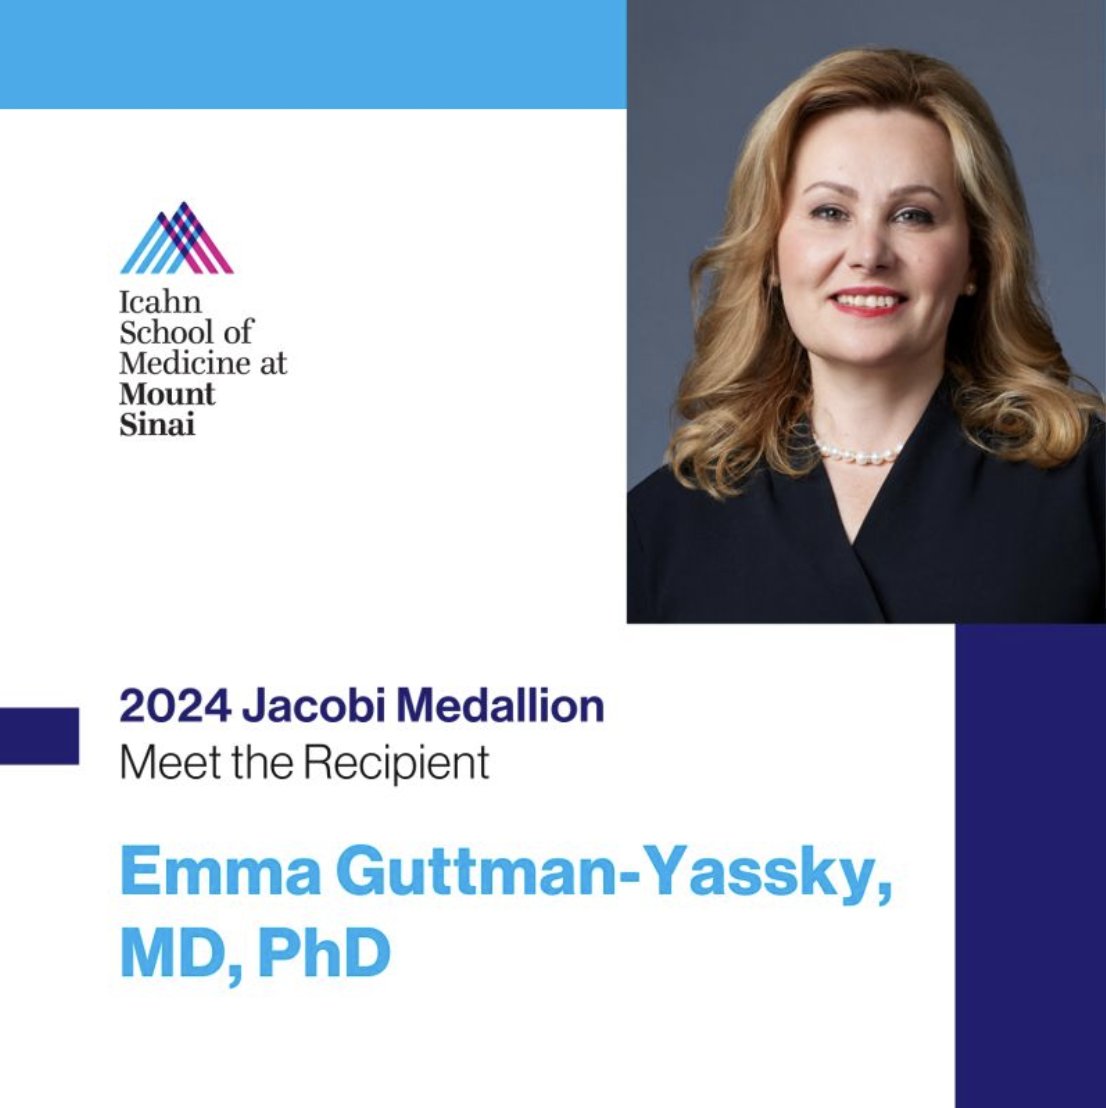 So humbled for this recognition among such great leaders! #mountsinai #dermatology #therapeutic #innovation #innovationinhealth #research #researchanddevelopment #novel #hospital #besthospital